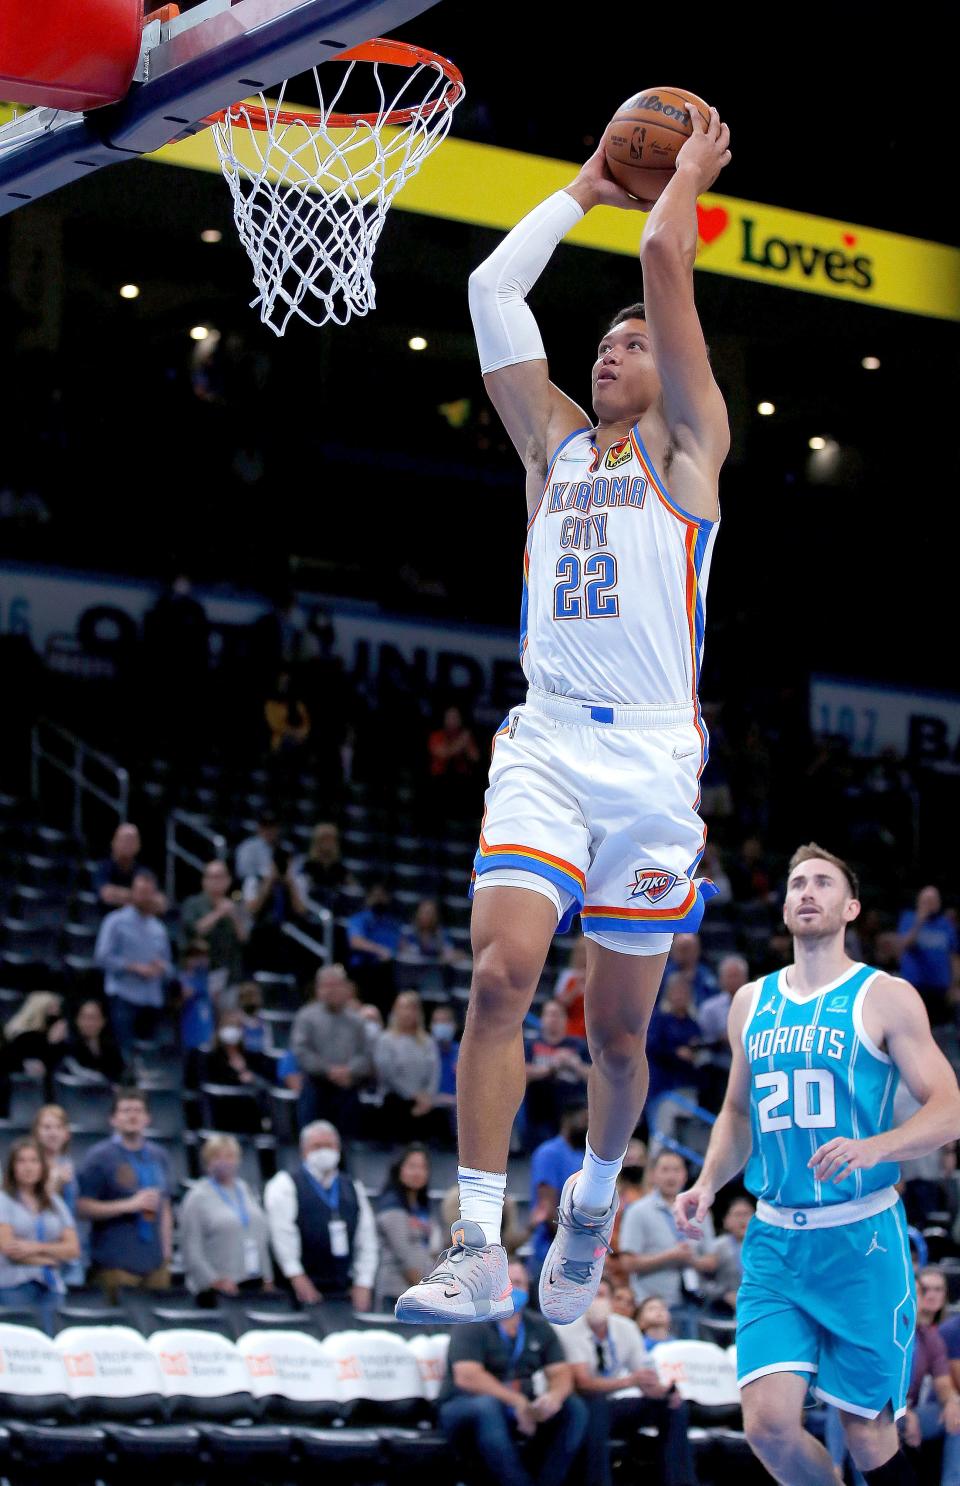 Oklahoma City's Isaiah Roby (22) dunks the ball in front of Charlotte's Gordon Hayward (20) in the first half during the preseason NBA game between the Oklahoma City Thunder and the Charlotte Hornets at Paycom Center in Oklahoma City, Monday, Oct. 4, 2021. 